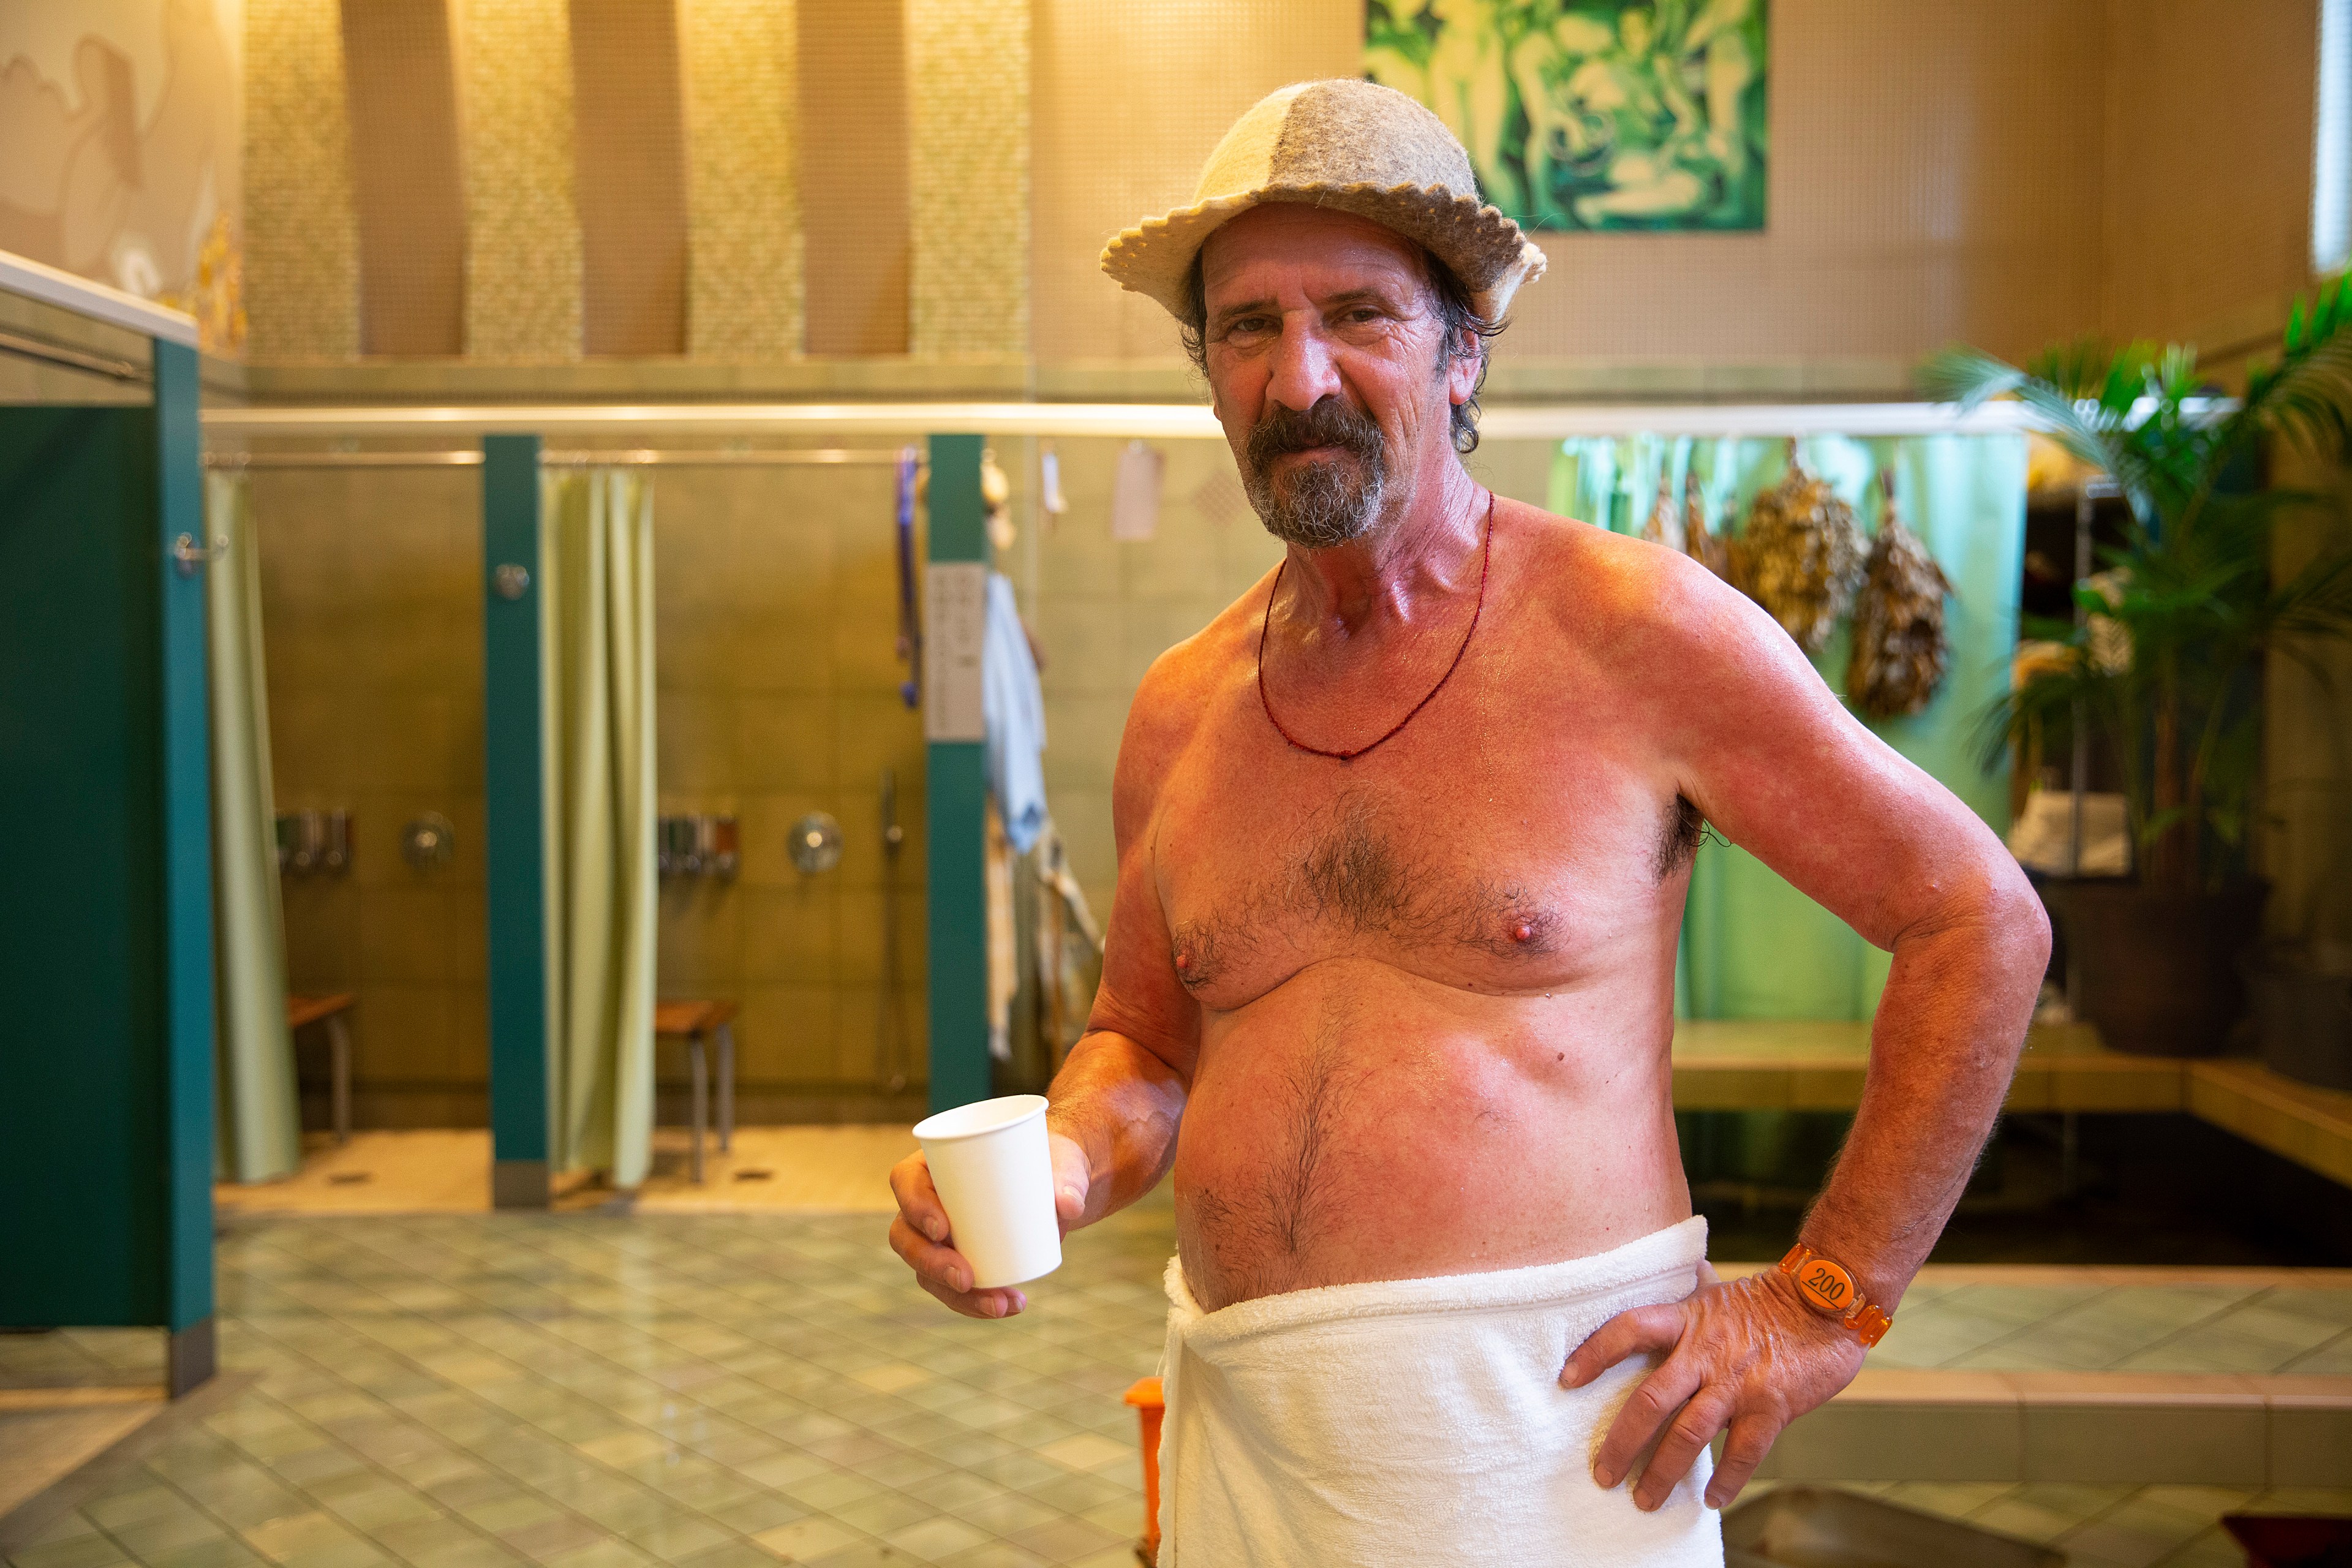 Get Naked, Drink Beer and Treat Yourself at This Russian Bathhouse in San Francisco